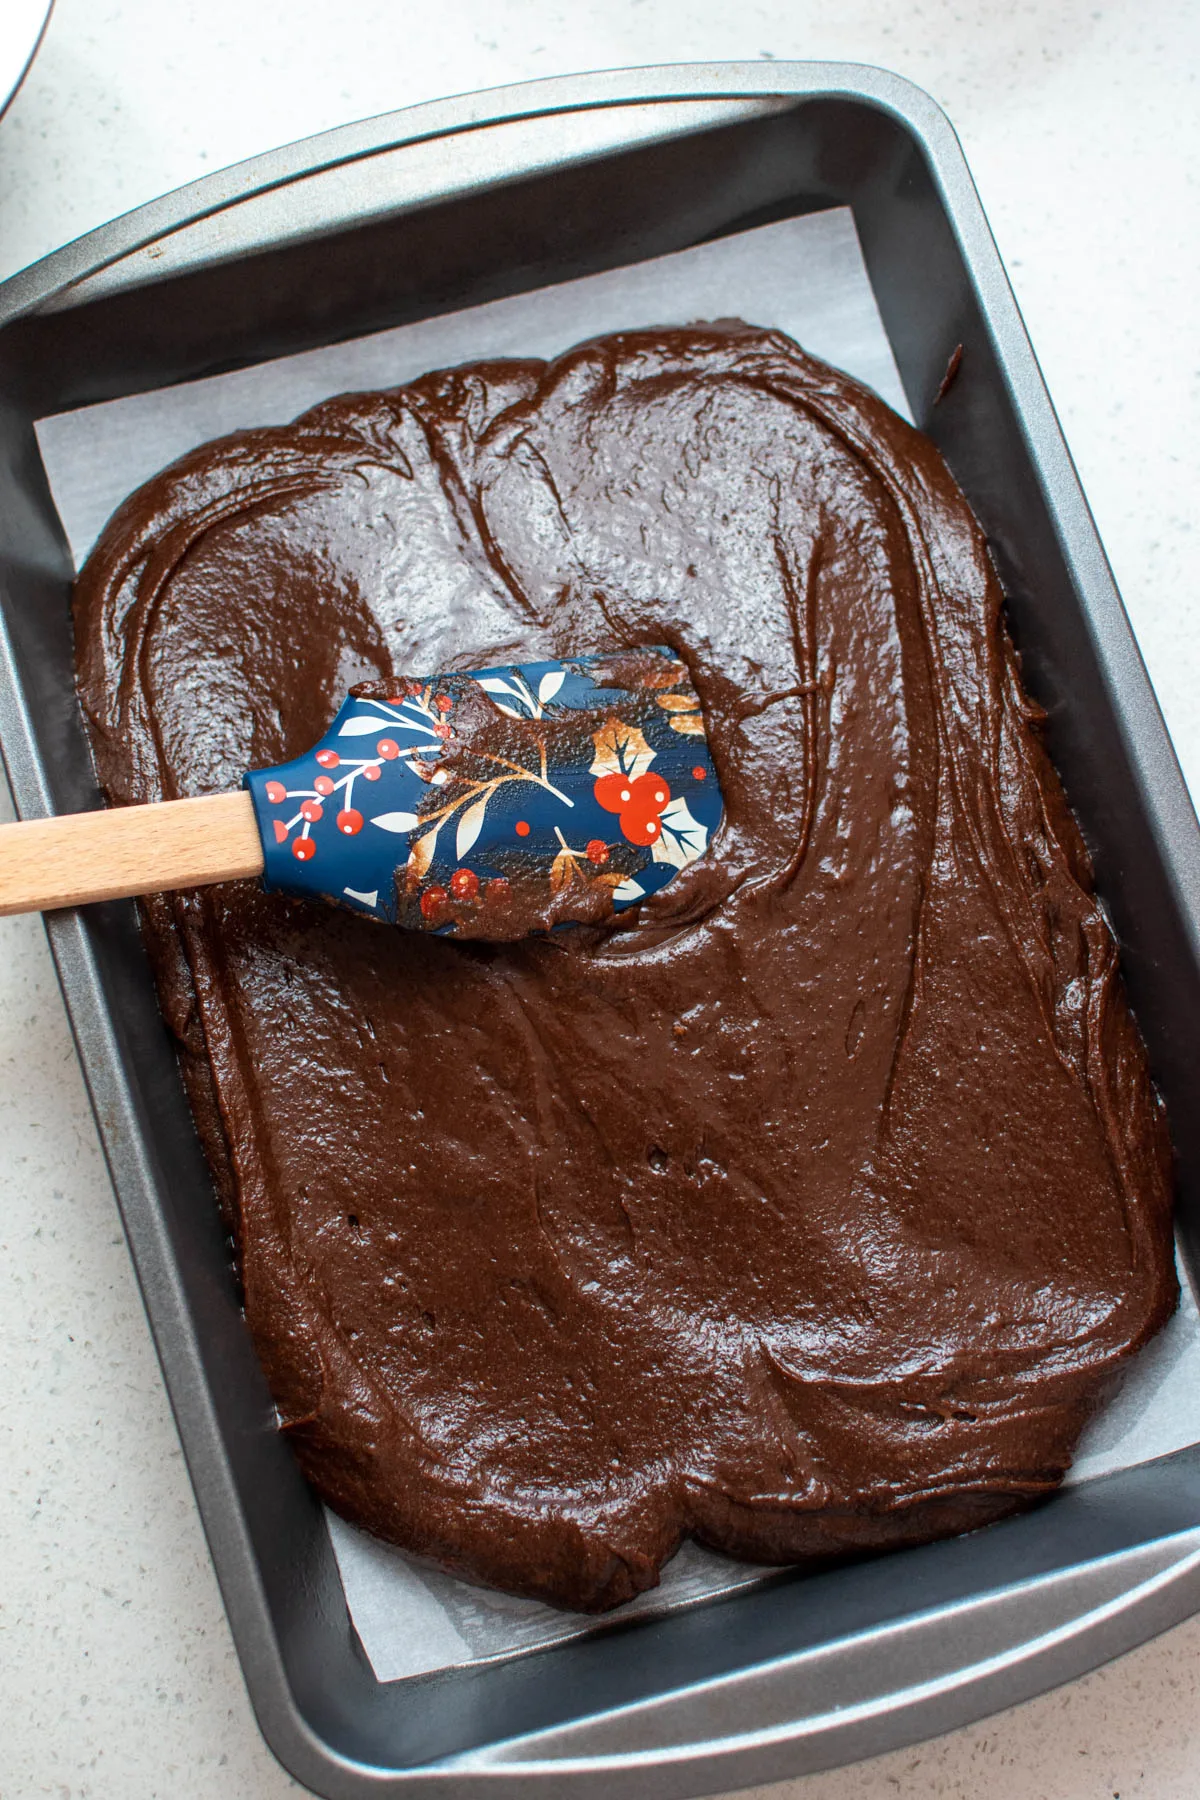 Rubber spatula rests in brownie batter in baking pan with parchment paper.